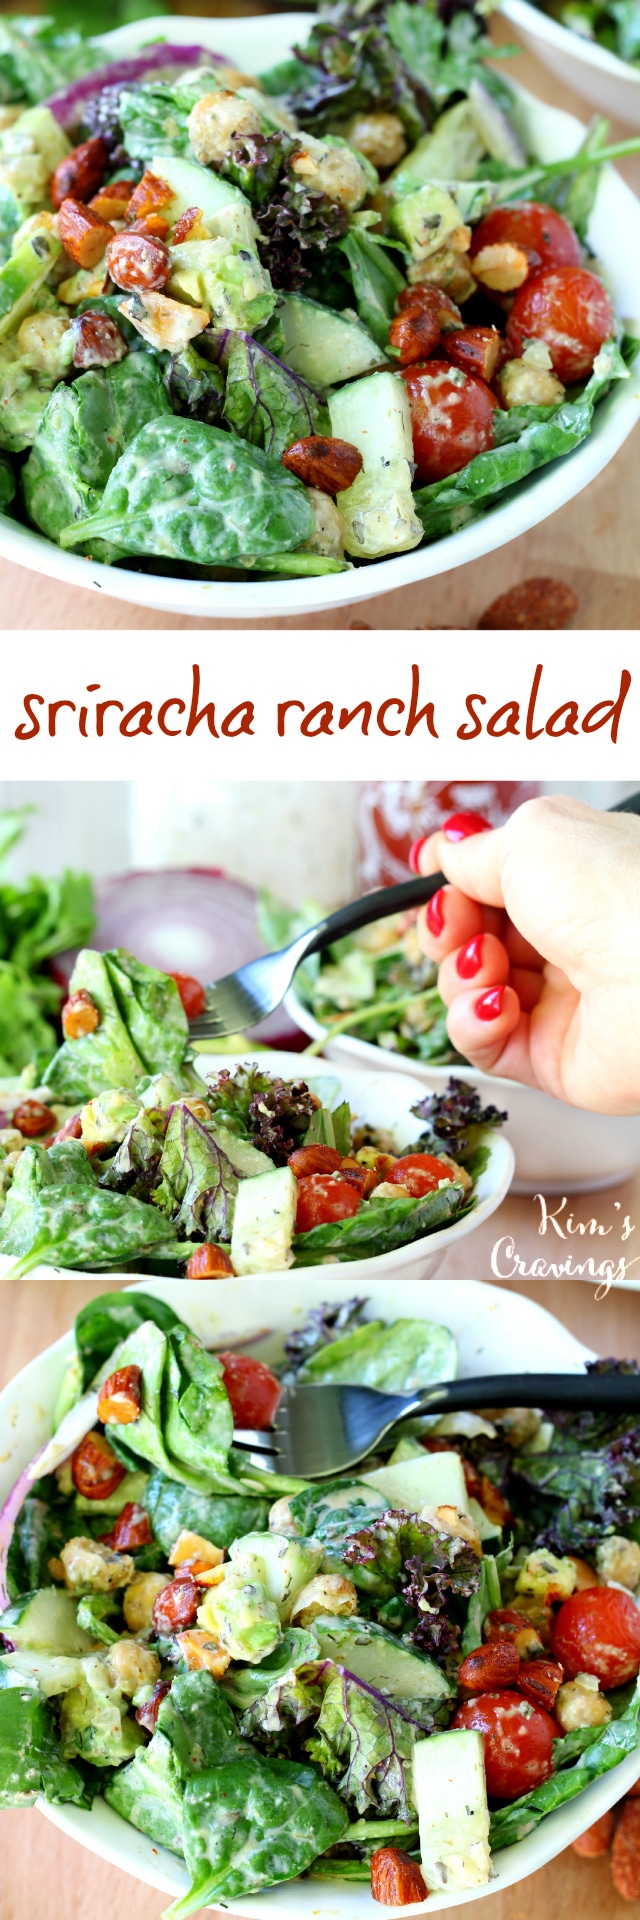 Sriracha Ranch Salad is a blend of some of my favorite ingredients with some major pizzazz from homemade ranch, kicked up a notch with sriracha sauce.